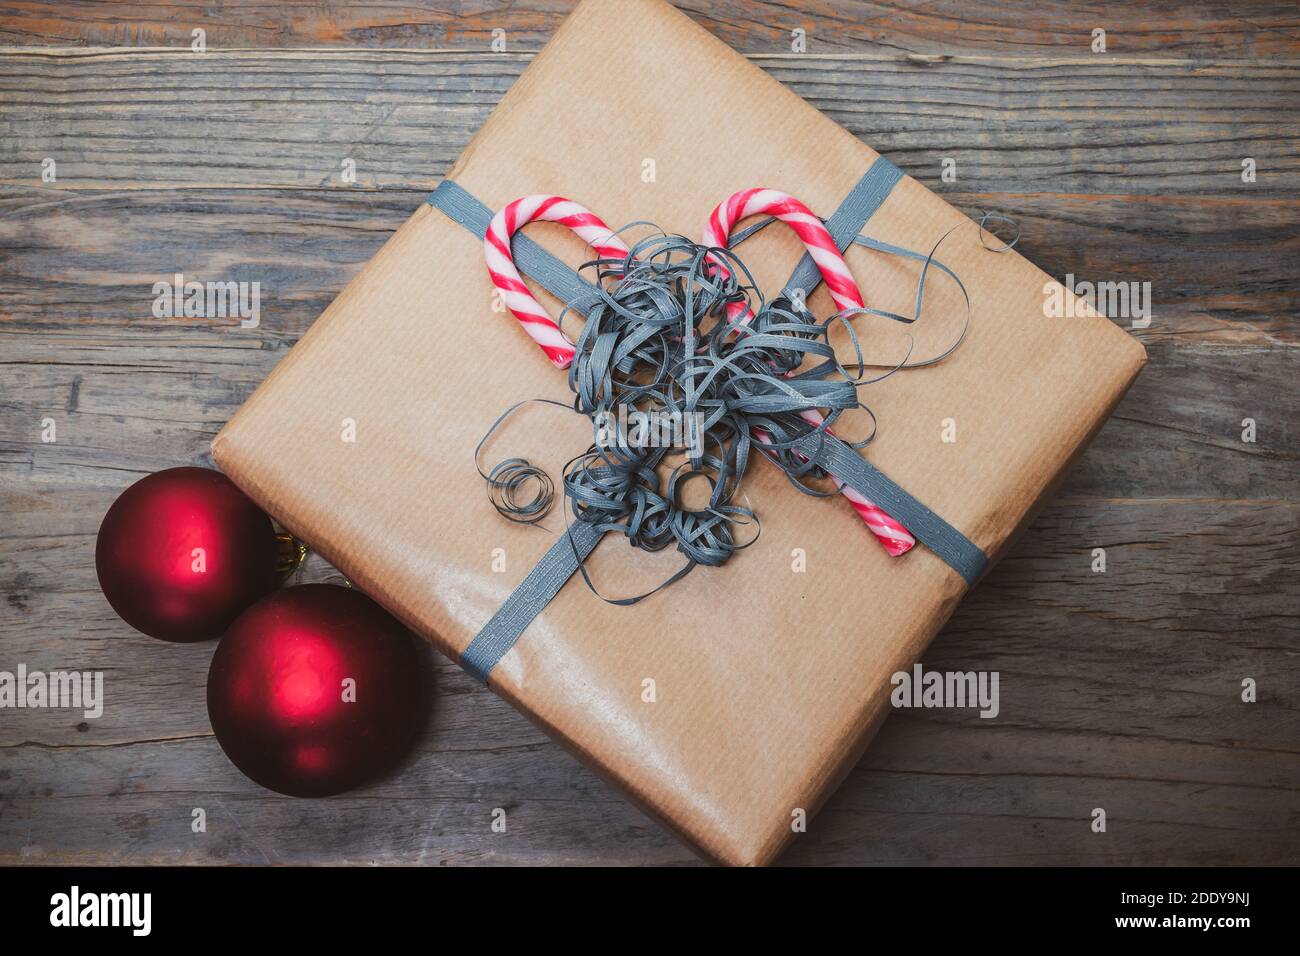 Brown Christmas gift box decorated with candy canes and curled wrapping ribbon. Stock Photo